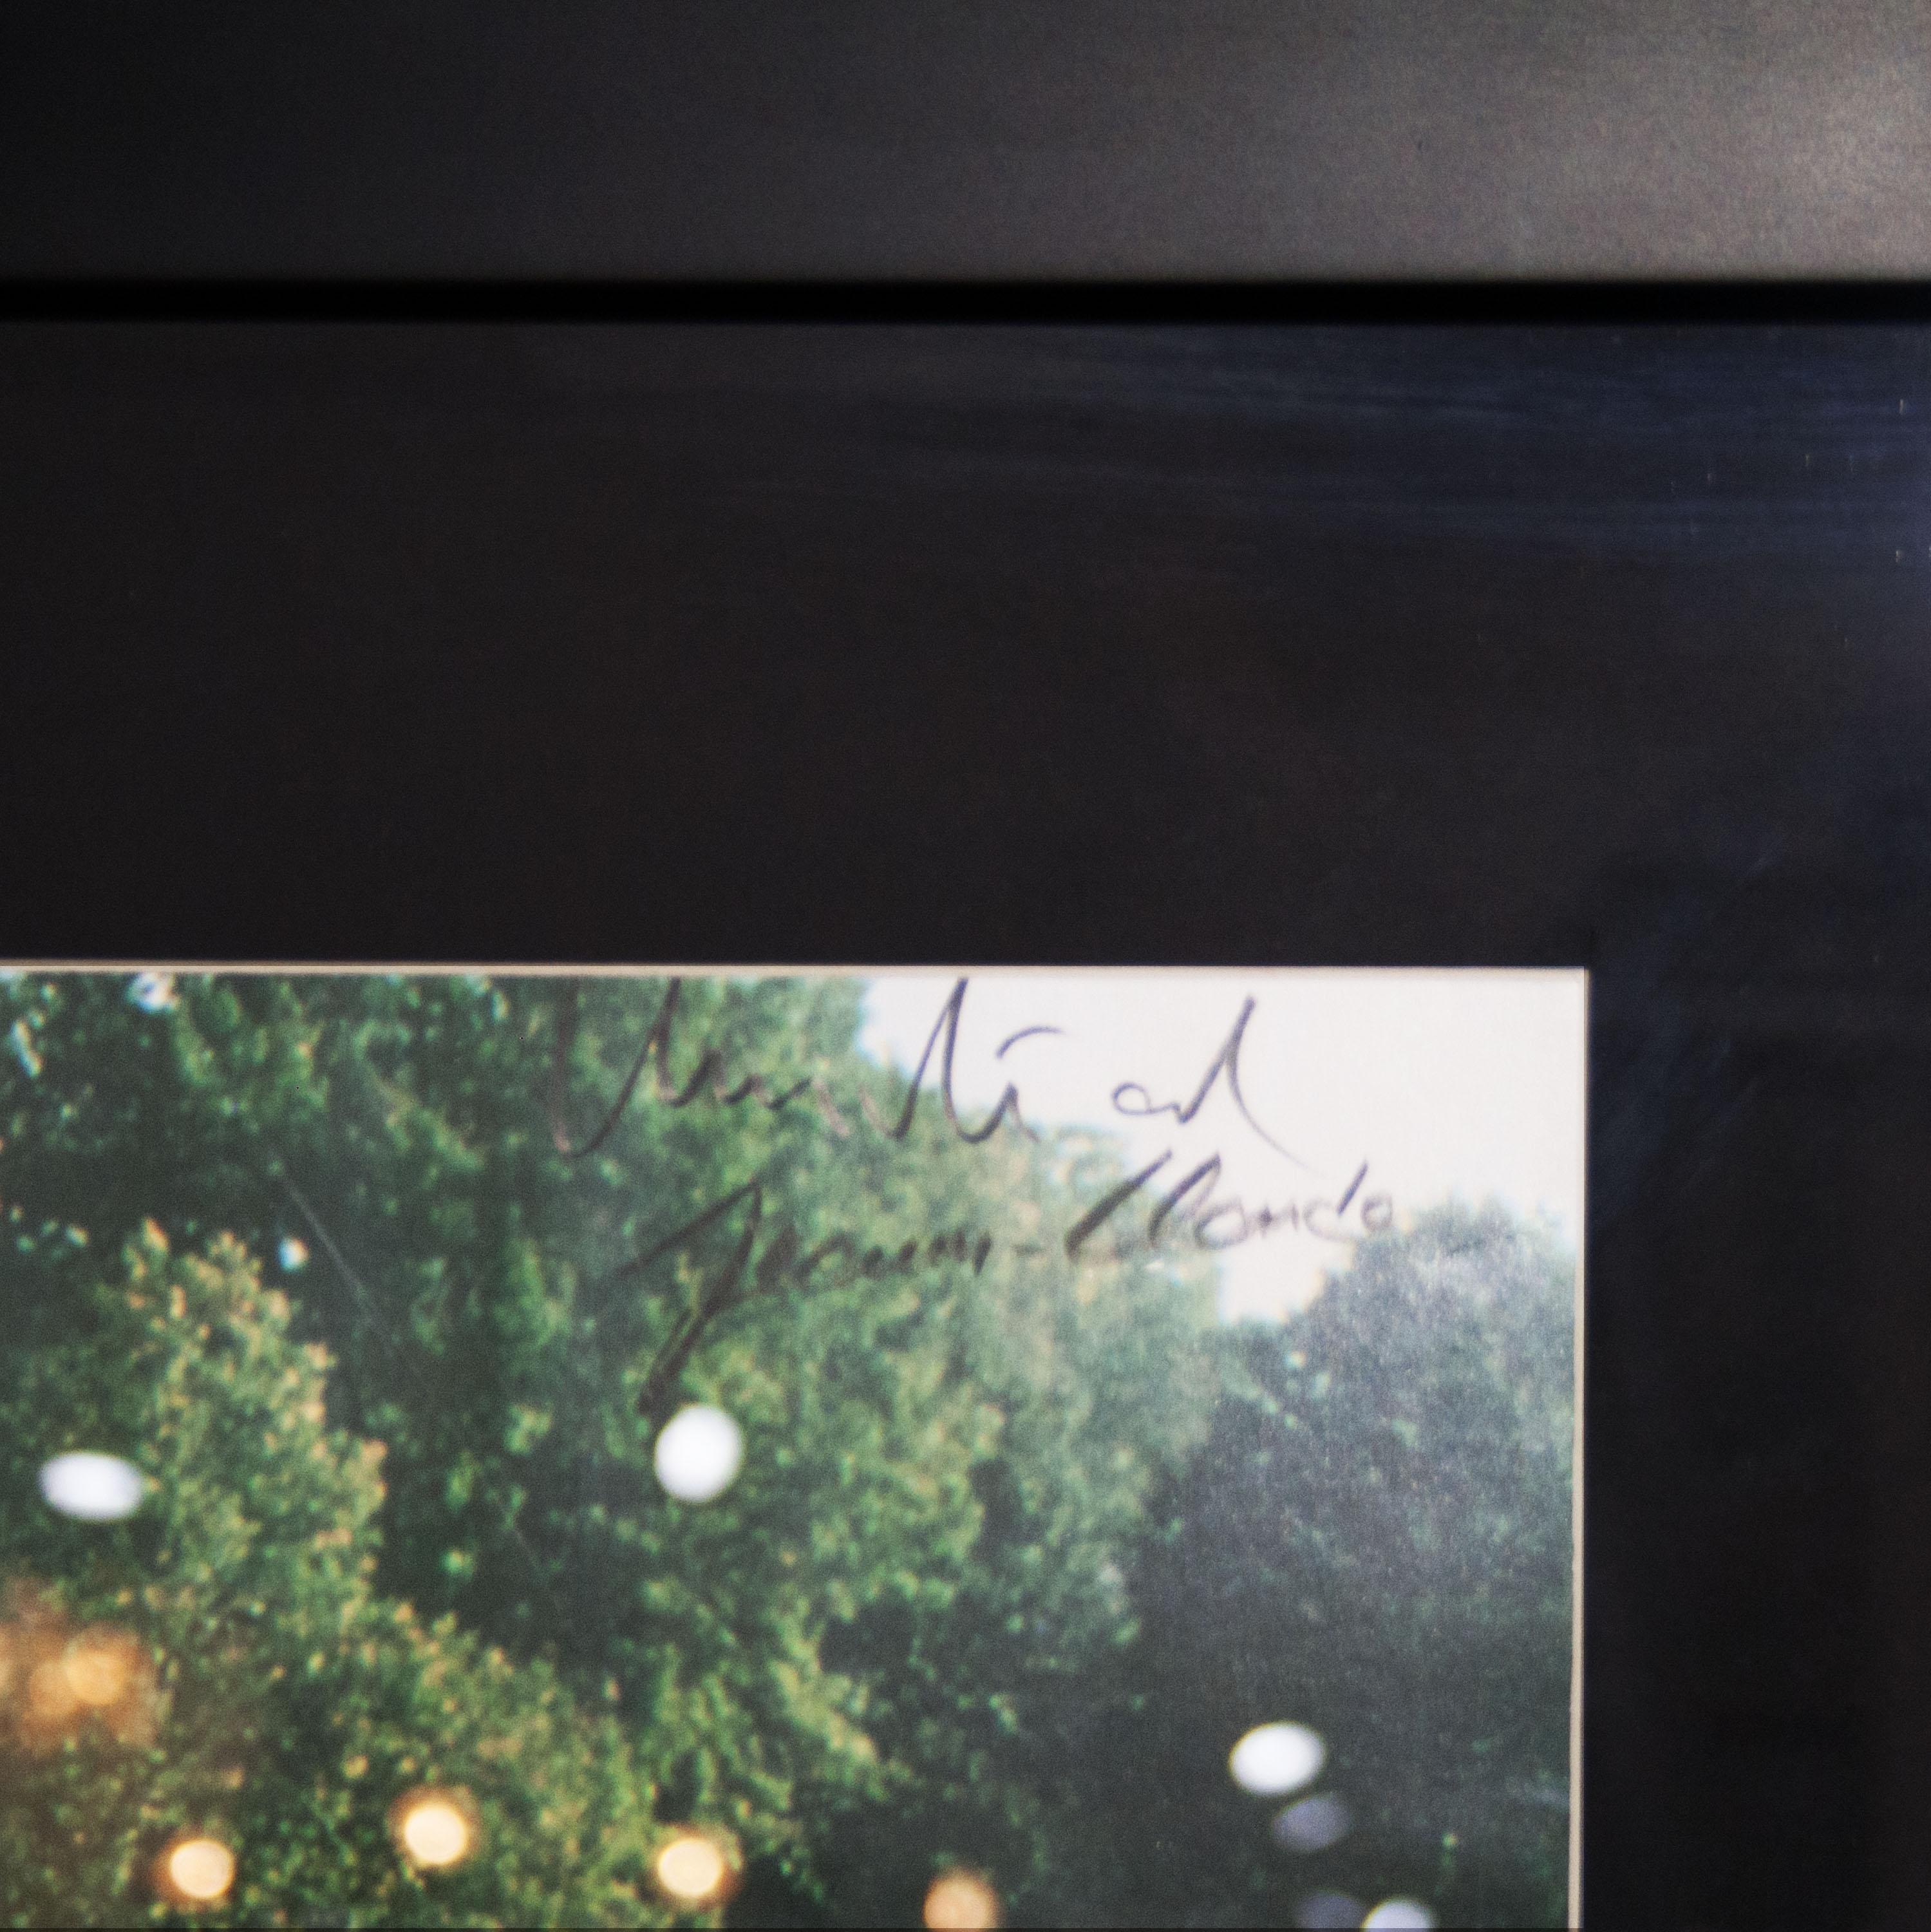 Signed and framed photo by Christo and Jeanne-Claude. Black lacquered wooden frame.

Tittle: 